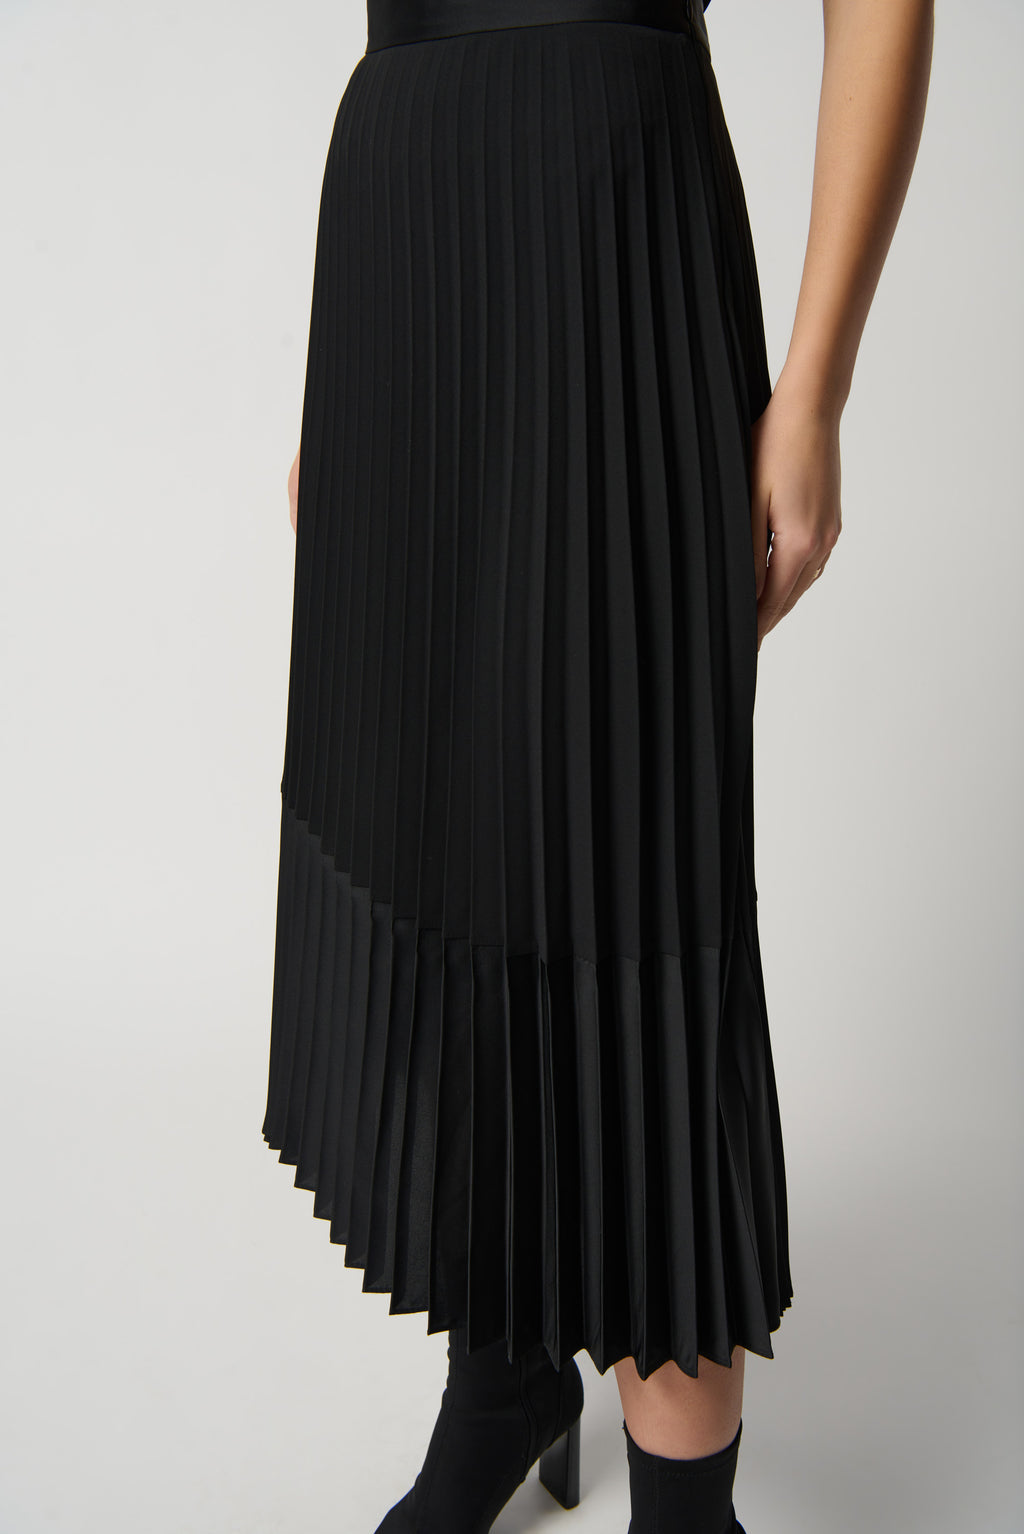 Joseph Ribkoff Black Georgette and Satin Pleated A-Line Skirt Style 234068